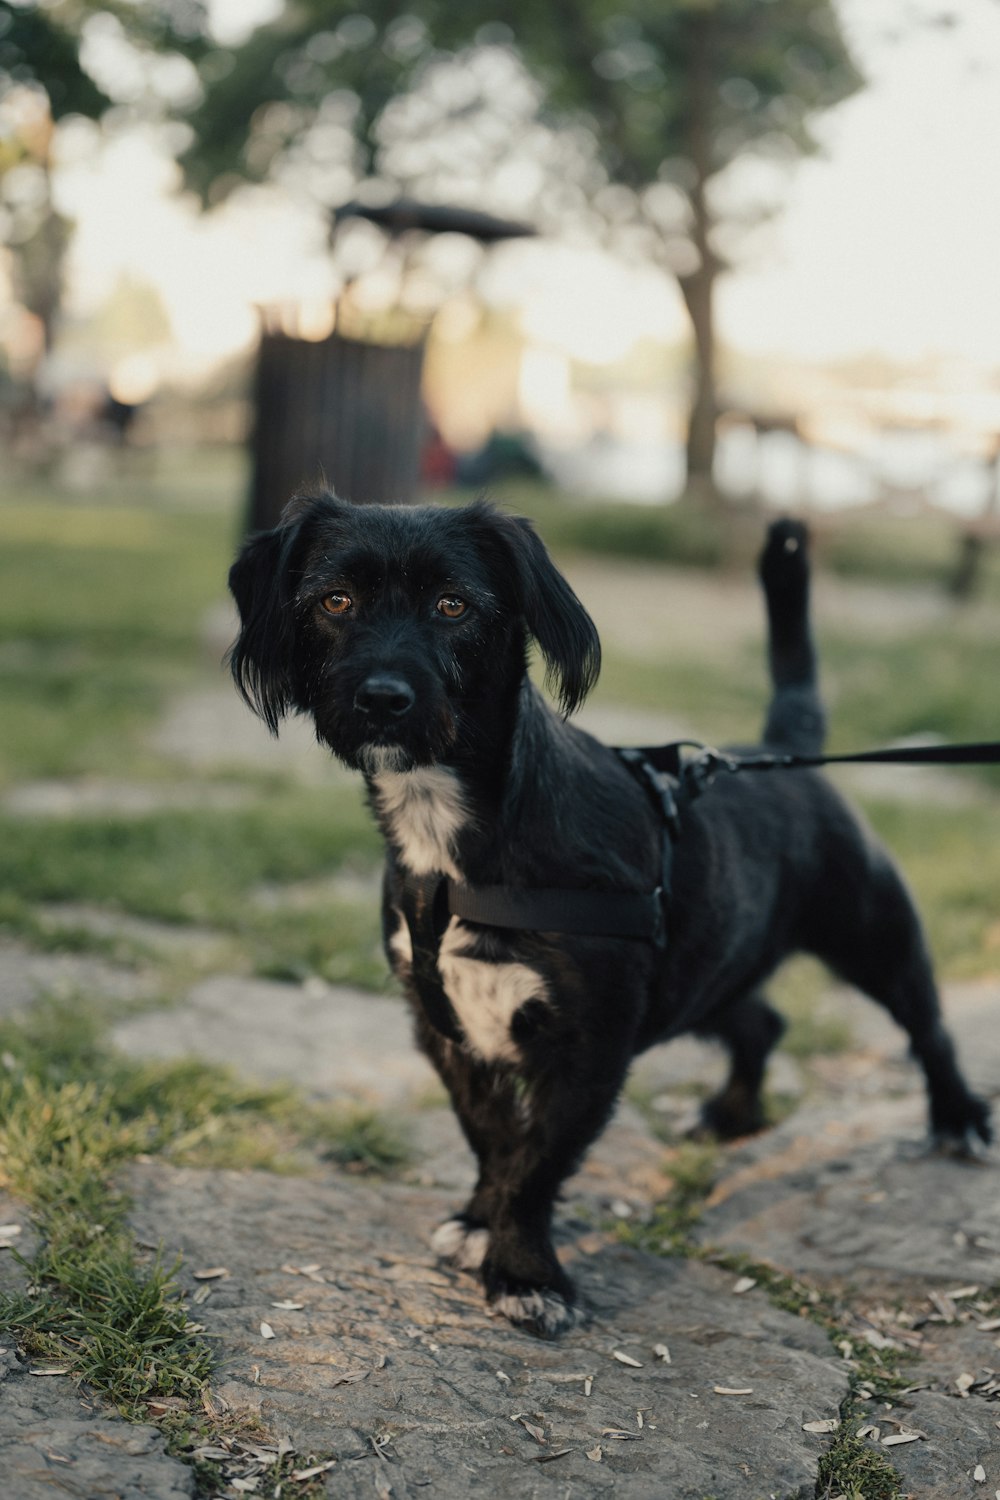 a black dog with a harness on walking on a leash